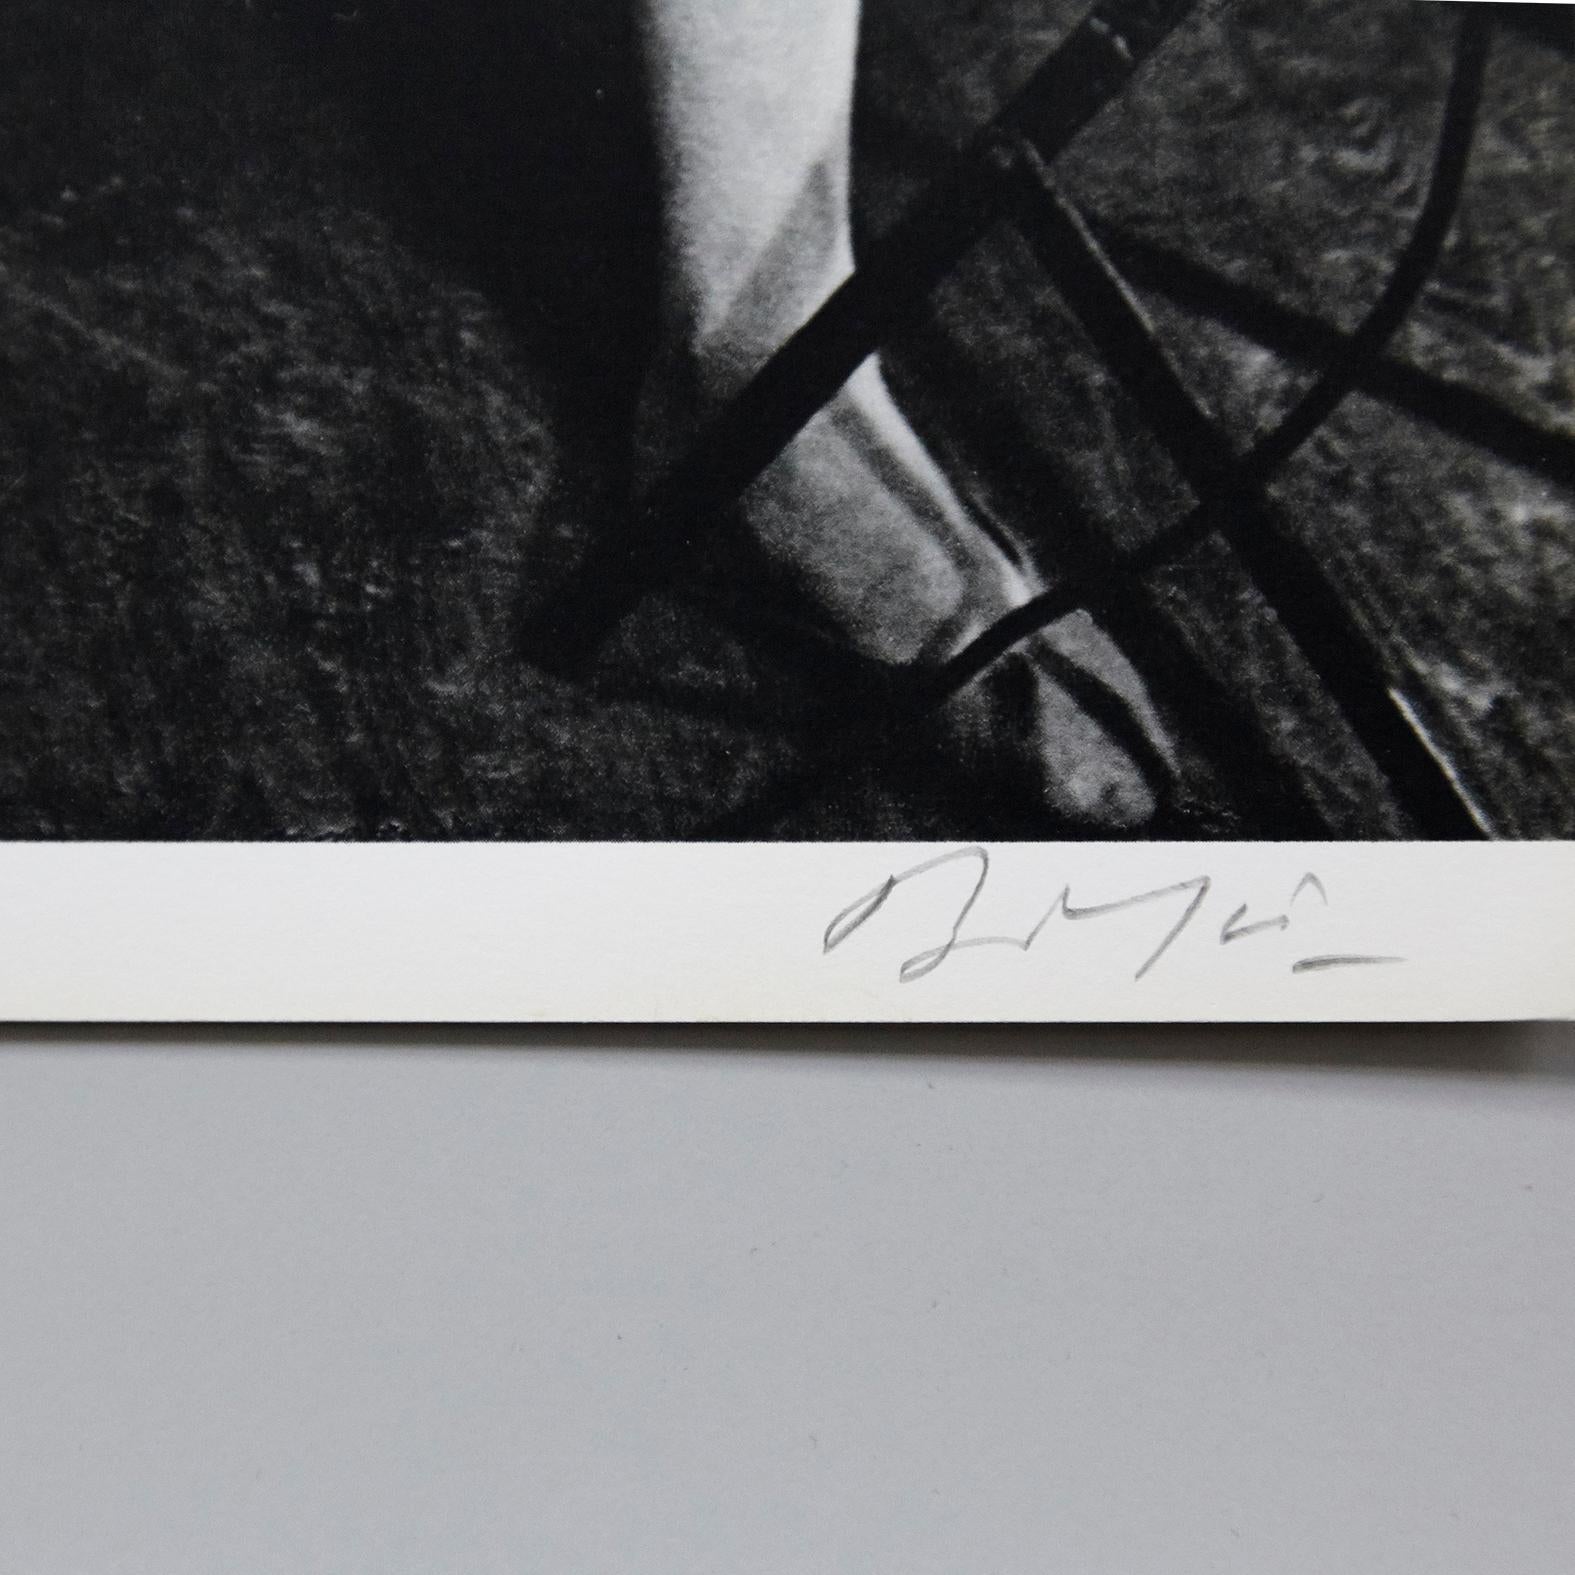 Signed photolithography by Brassaï, 1979.

Stamped rotogravure reproduction of series by Bolaffiarte. Limited edition of 5000.

Exemplary number 2372.

Brassaï pseudonym of Gyula Halász; 9 September 1899 – 8 July 1984) was a Hungarian, French